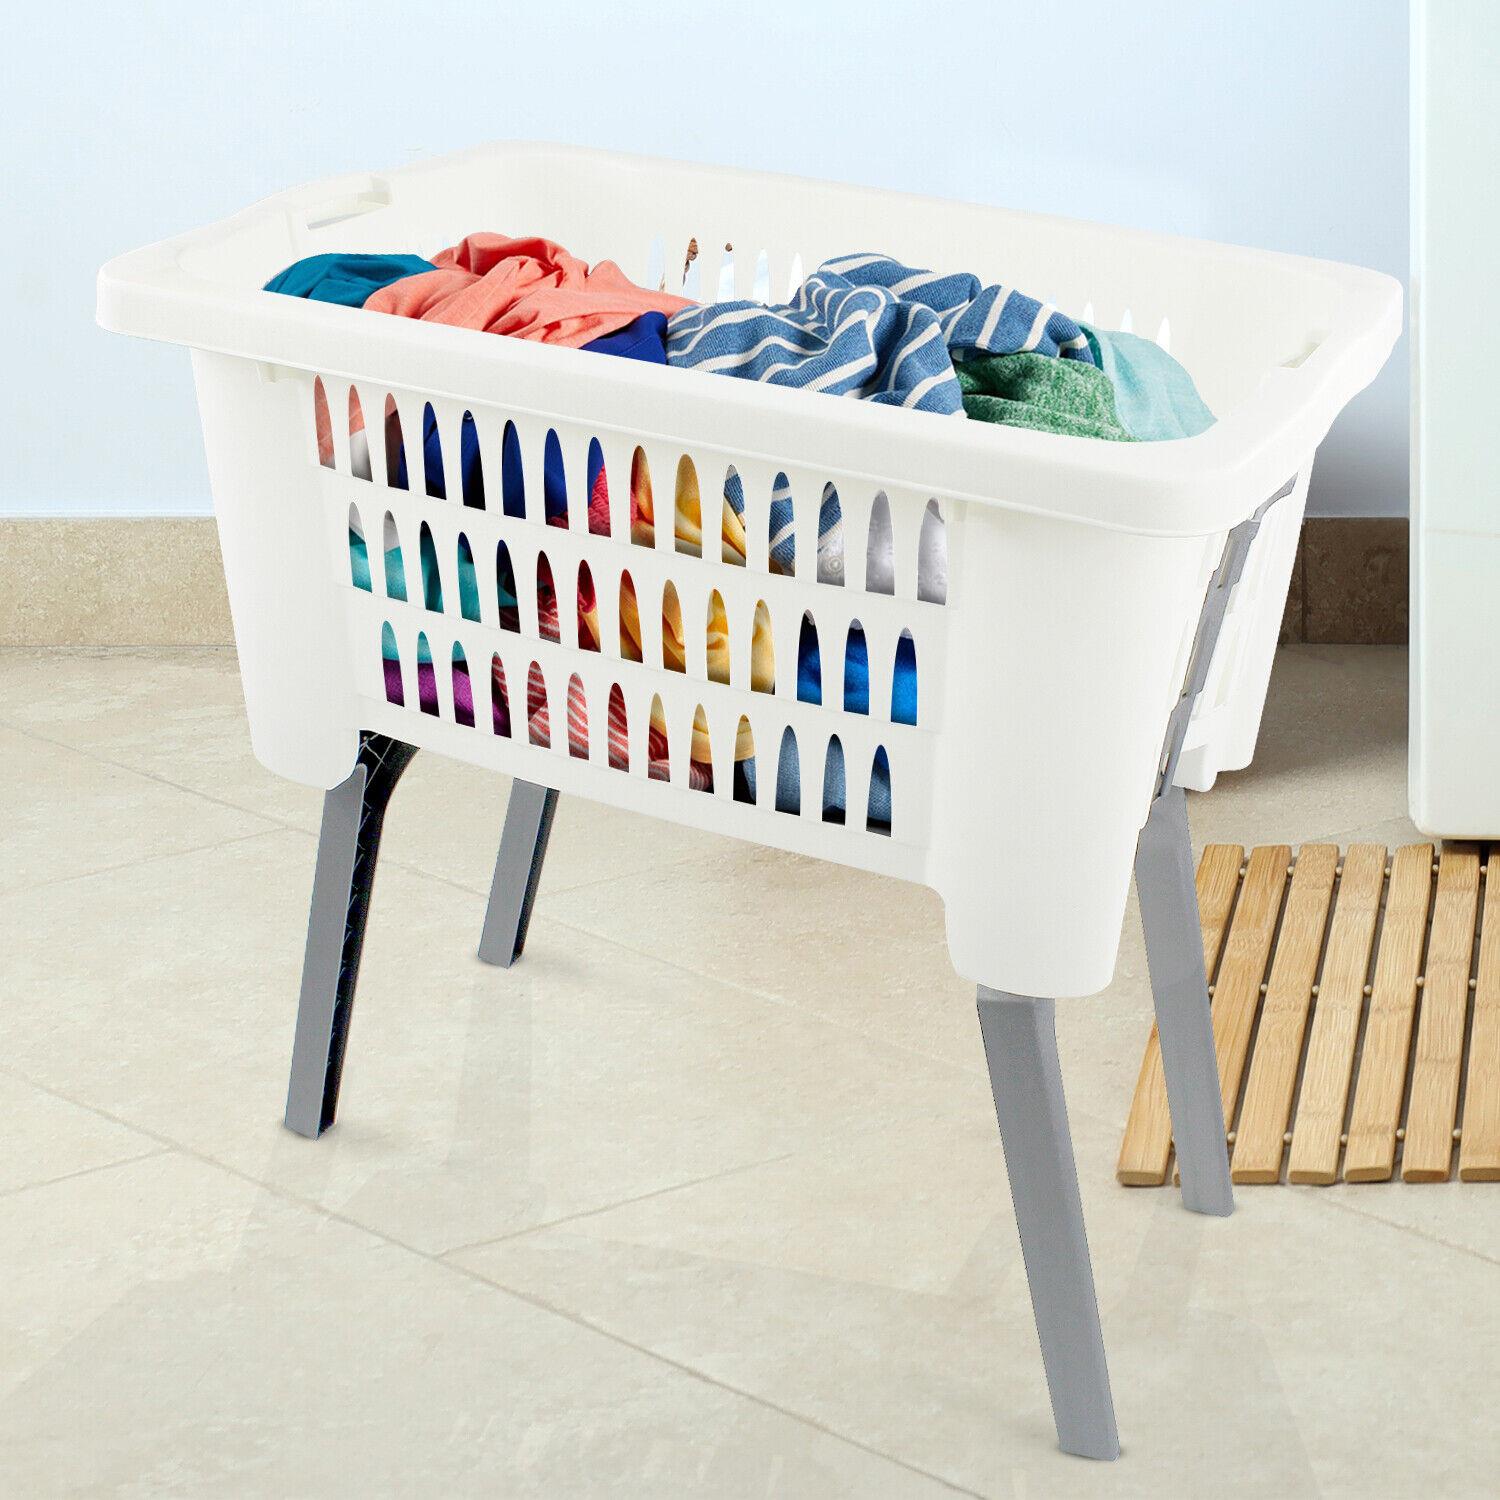 Laundry Basket with Foldable Legs by GEEZY - The Magic Toy Shop